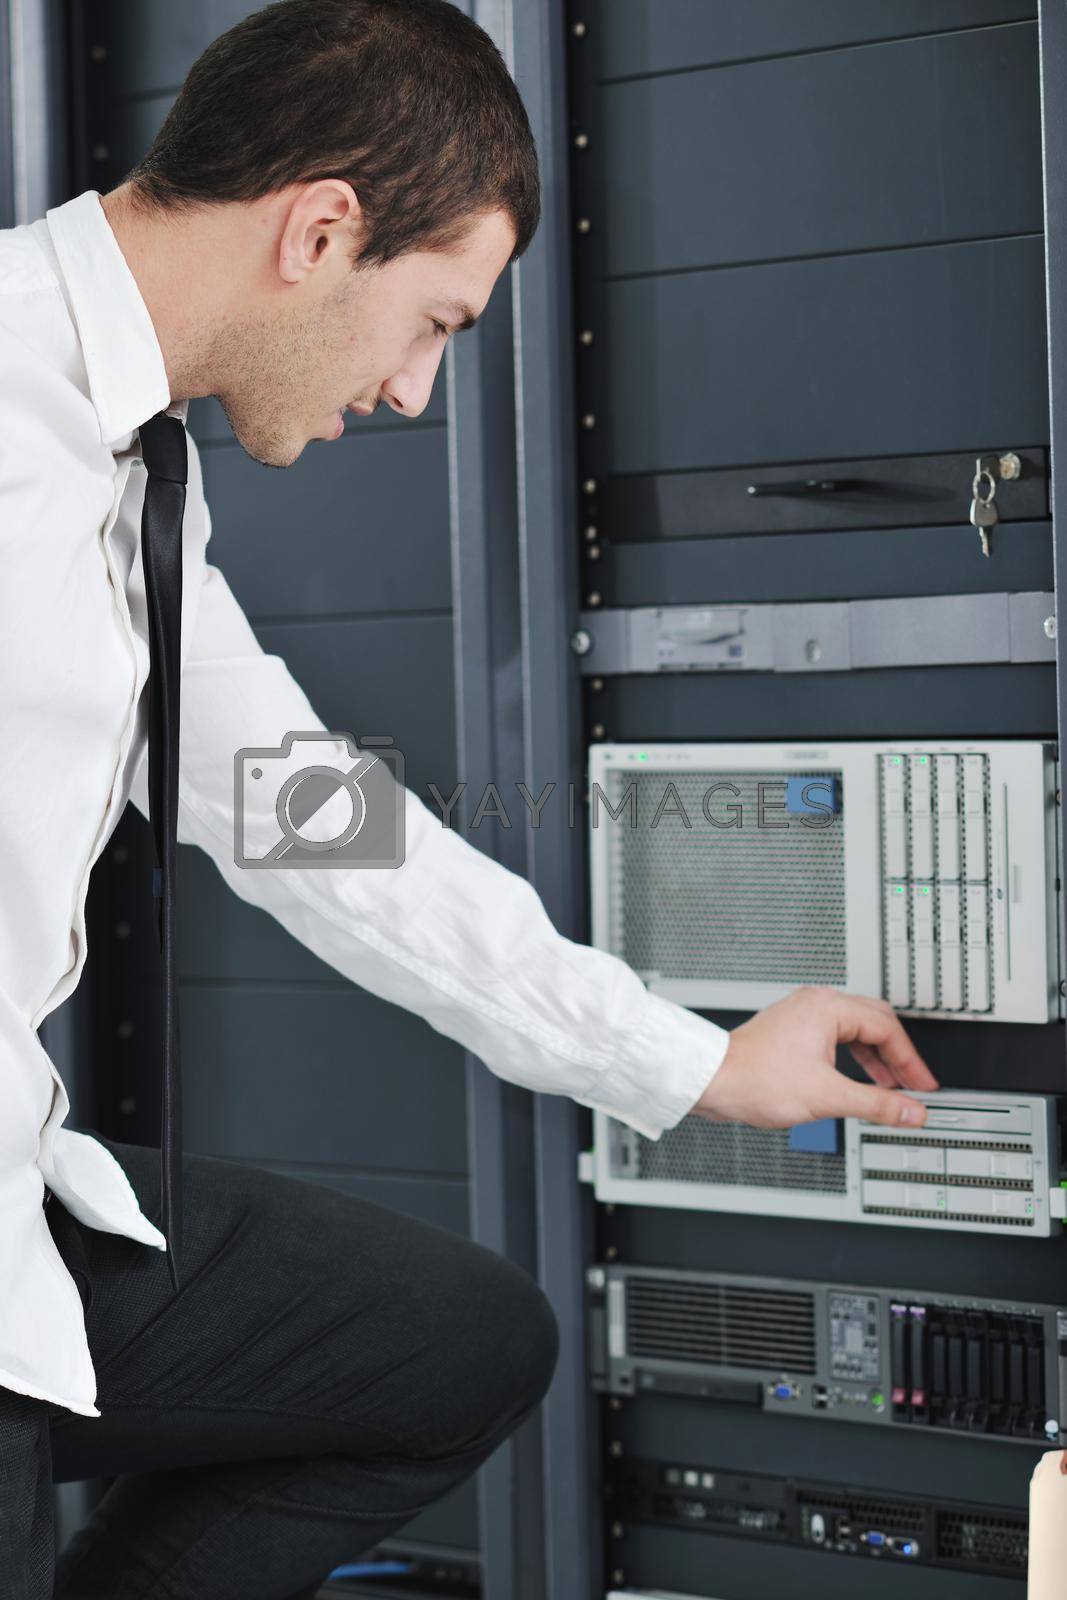 Royalty free image of young engeneer in datacenter server room by dotshock